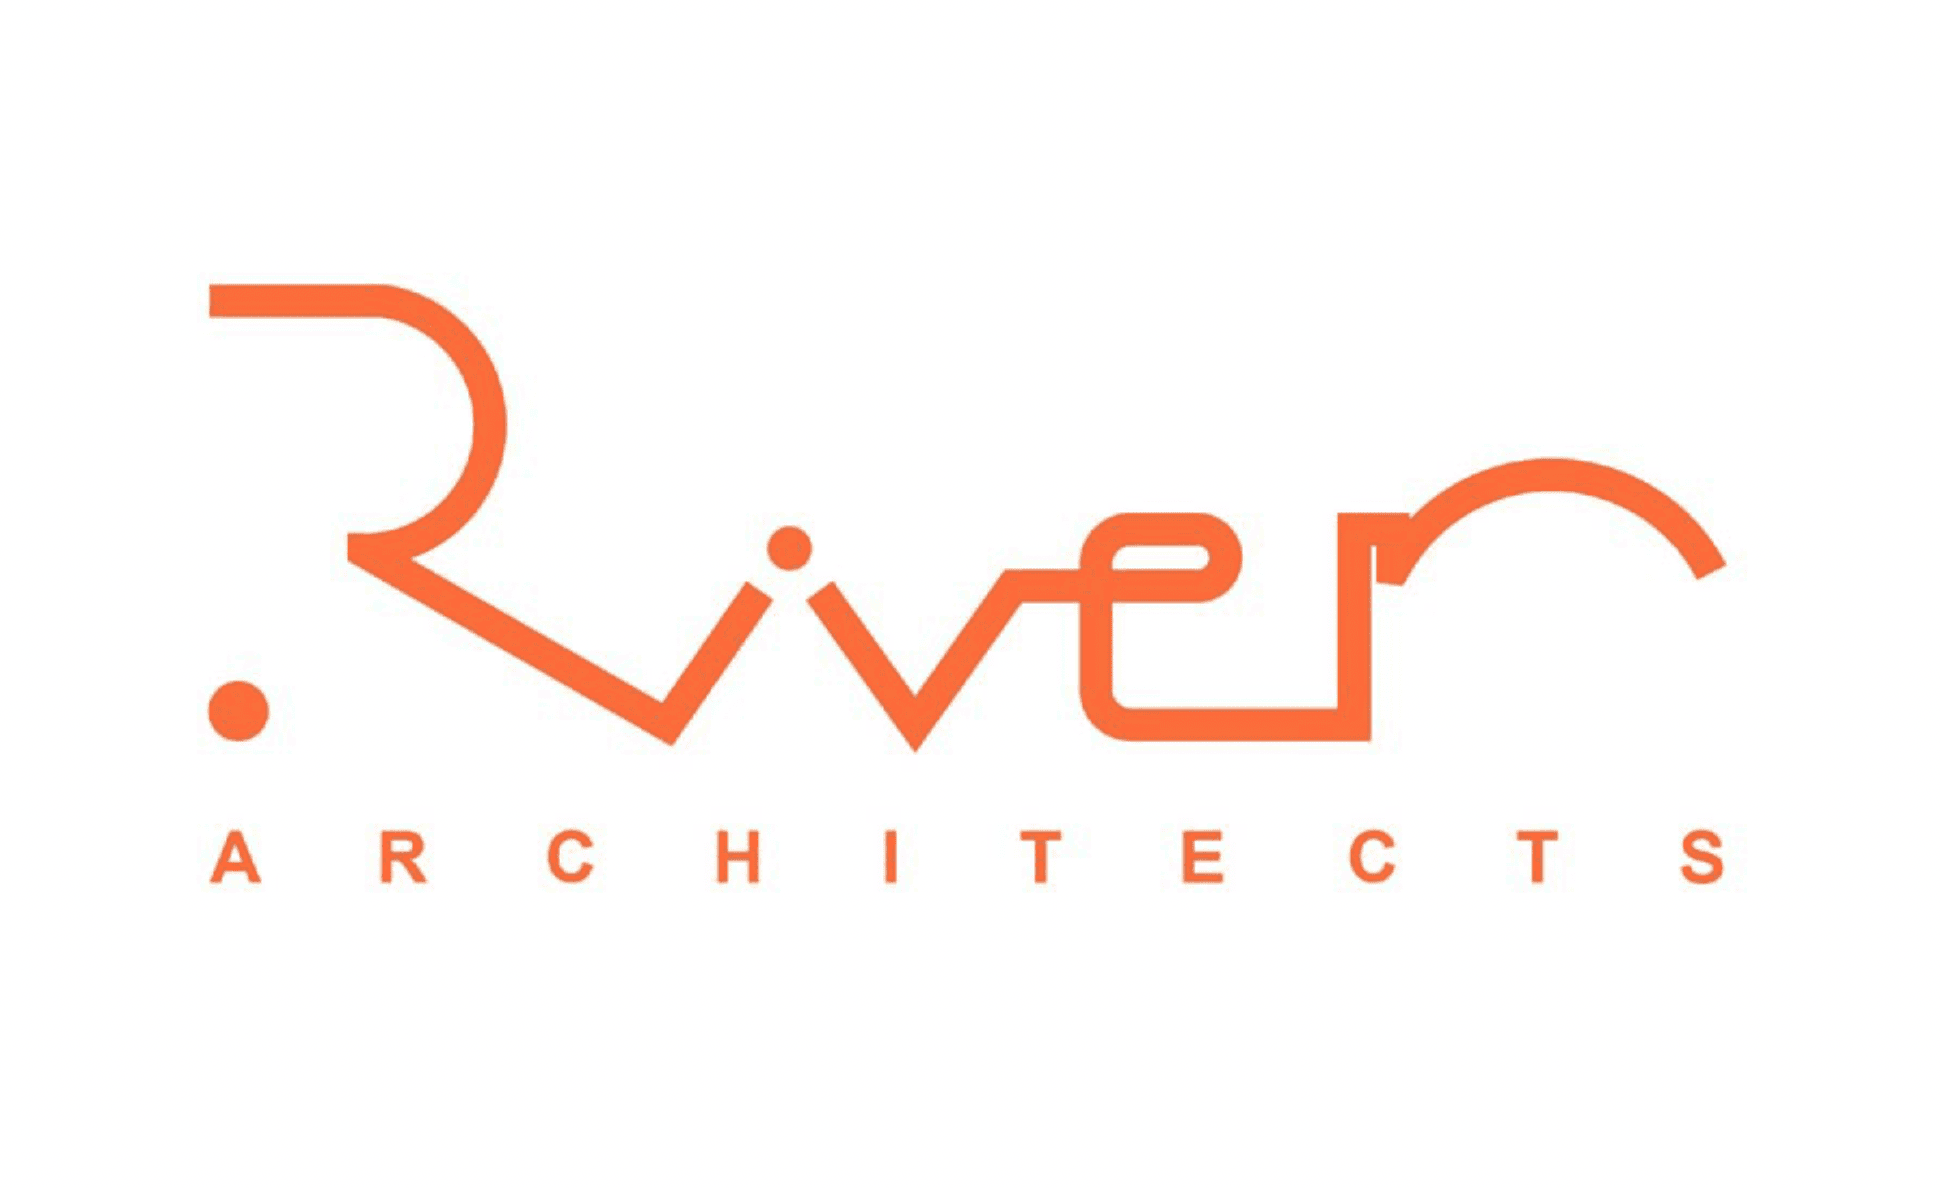 River Architects